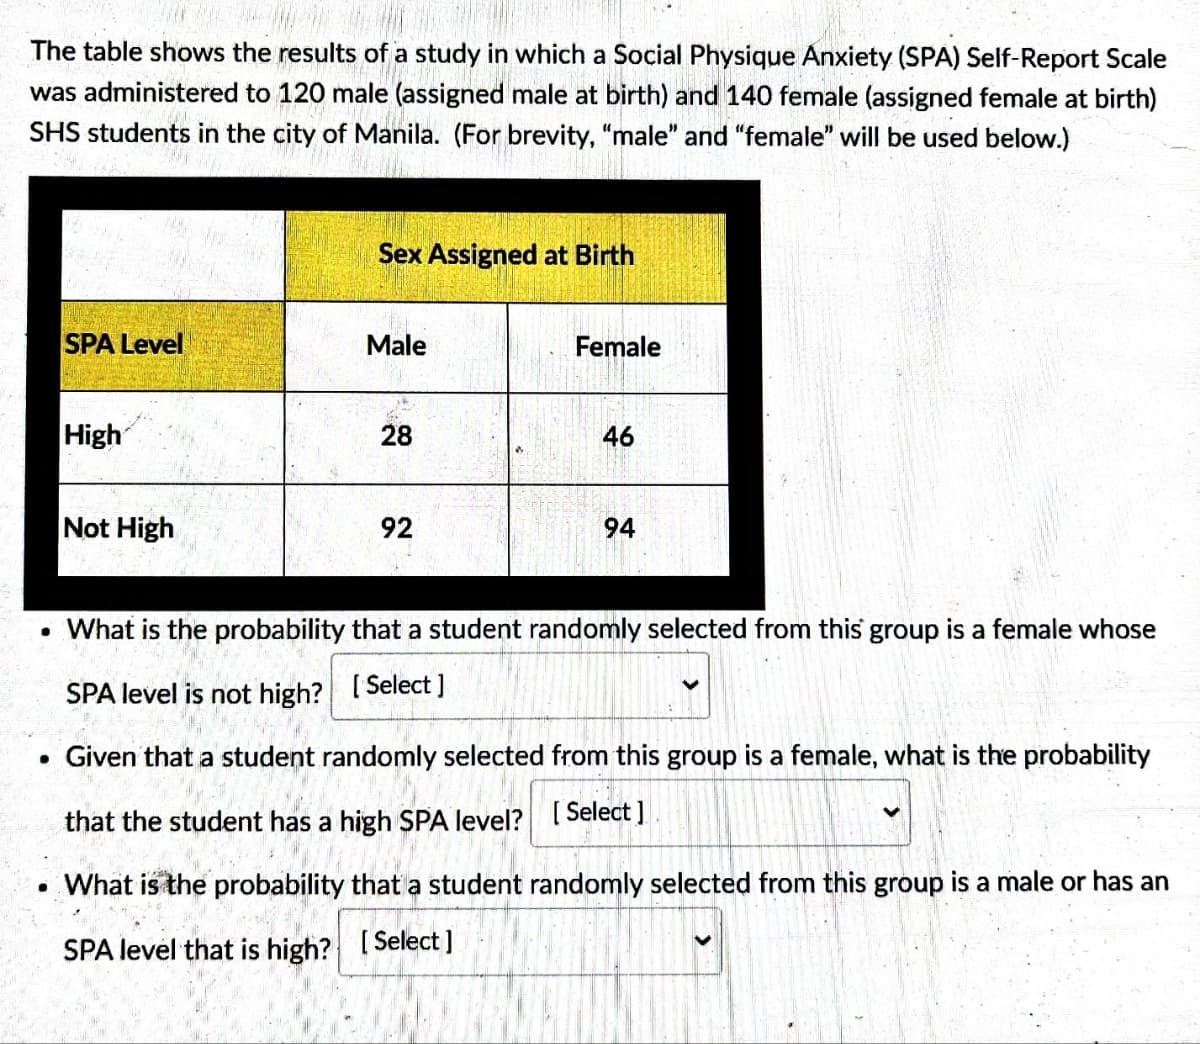 The table shows the results of a study in which a Social Physique Anxiety (SPA) Self-Report Scale
was administered to 120 male (assigned male at birth) and 140 female (assigned female at birth)
SHS students in the city of Manila. (For brevity, "male" and "female" will be used below.)
SPA Level
●
High
Not High
Sex Assigned at Birth
Male
28
92
Female
46
94
• What is the probability that a student randomly selected from this group is a female whose
SPA level is not high? [Select]
Given that a student randomly selected from this group is a female, what is the probability
that the student has a high SPA level? [Select]
. What is the probability that a student randomly selected from this group is a male or has an
SPA level that is high? [Select]